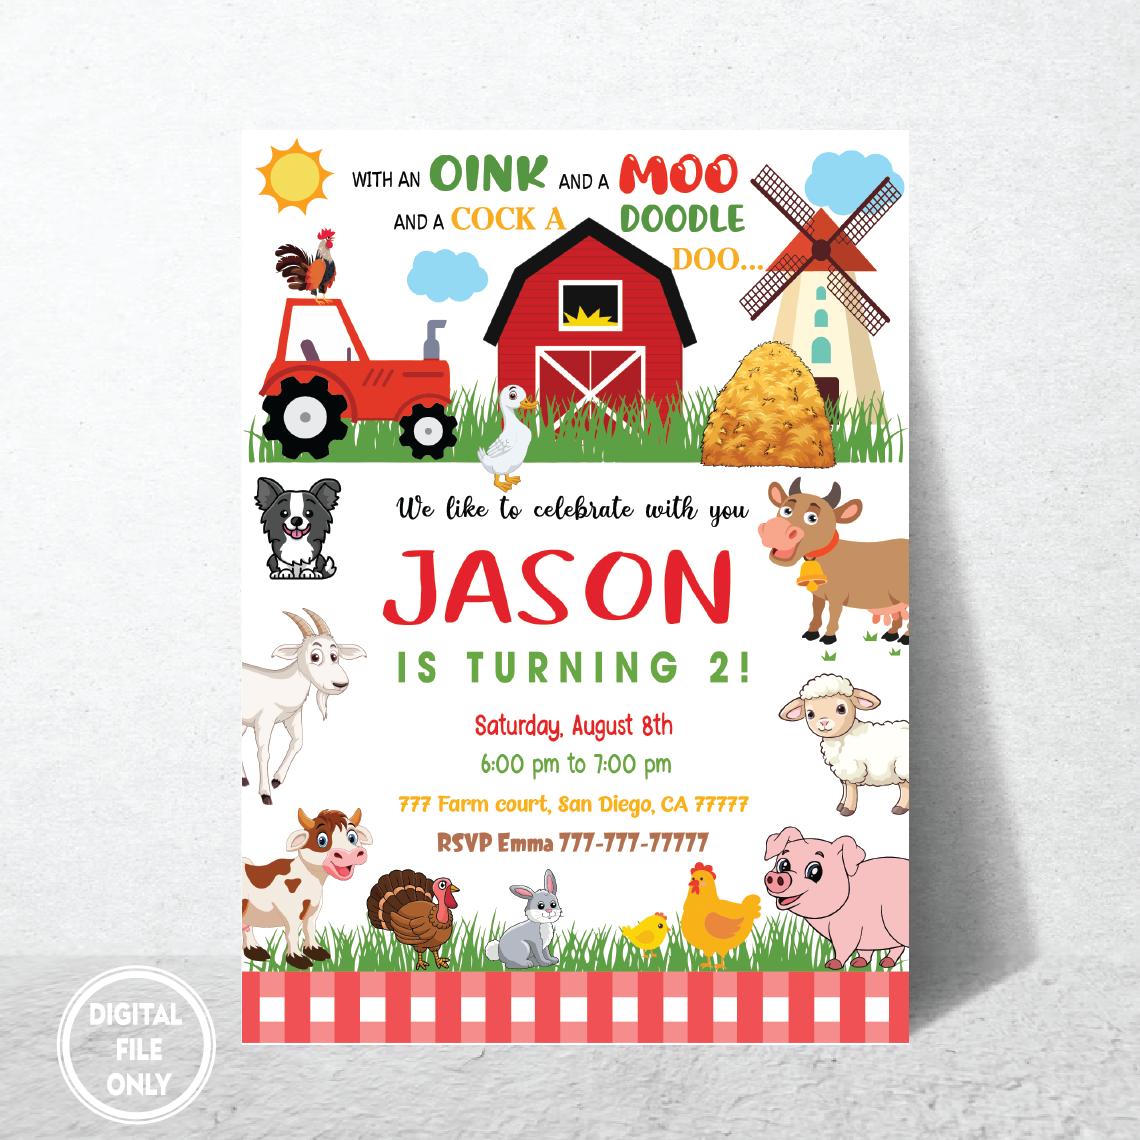 Personalized File Farm Invitation PNG File Only, Farm Birthday Invites Png, Instant Download Farm Party Invitations Boy Girl Png